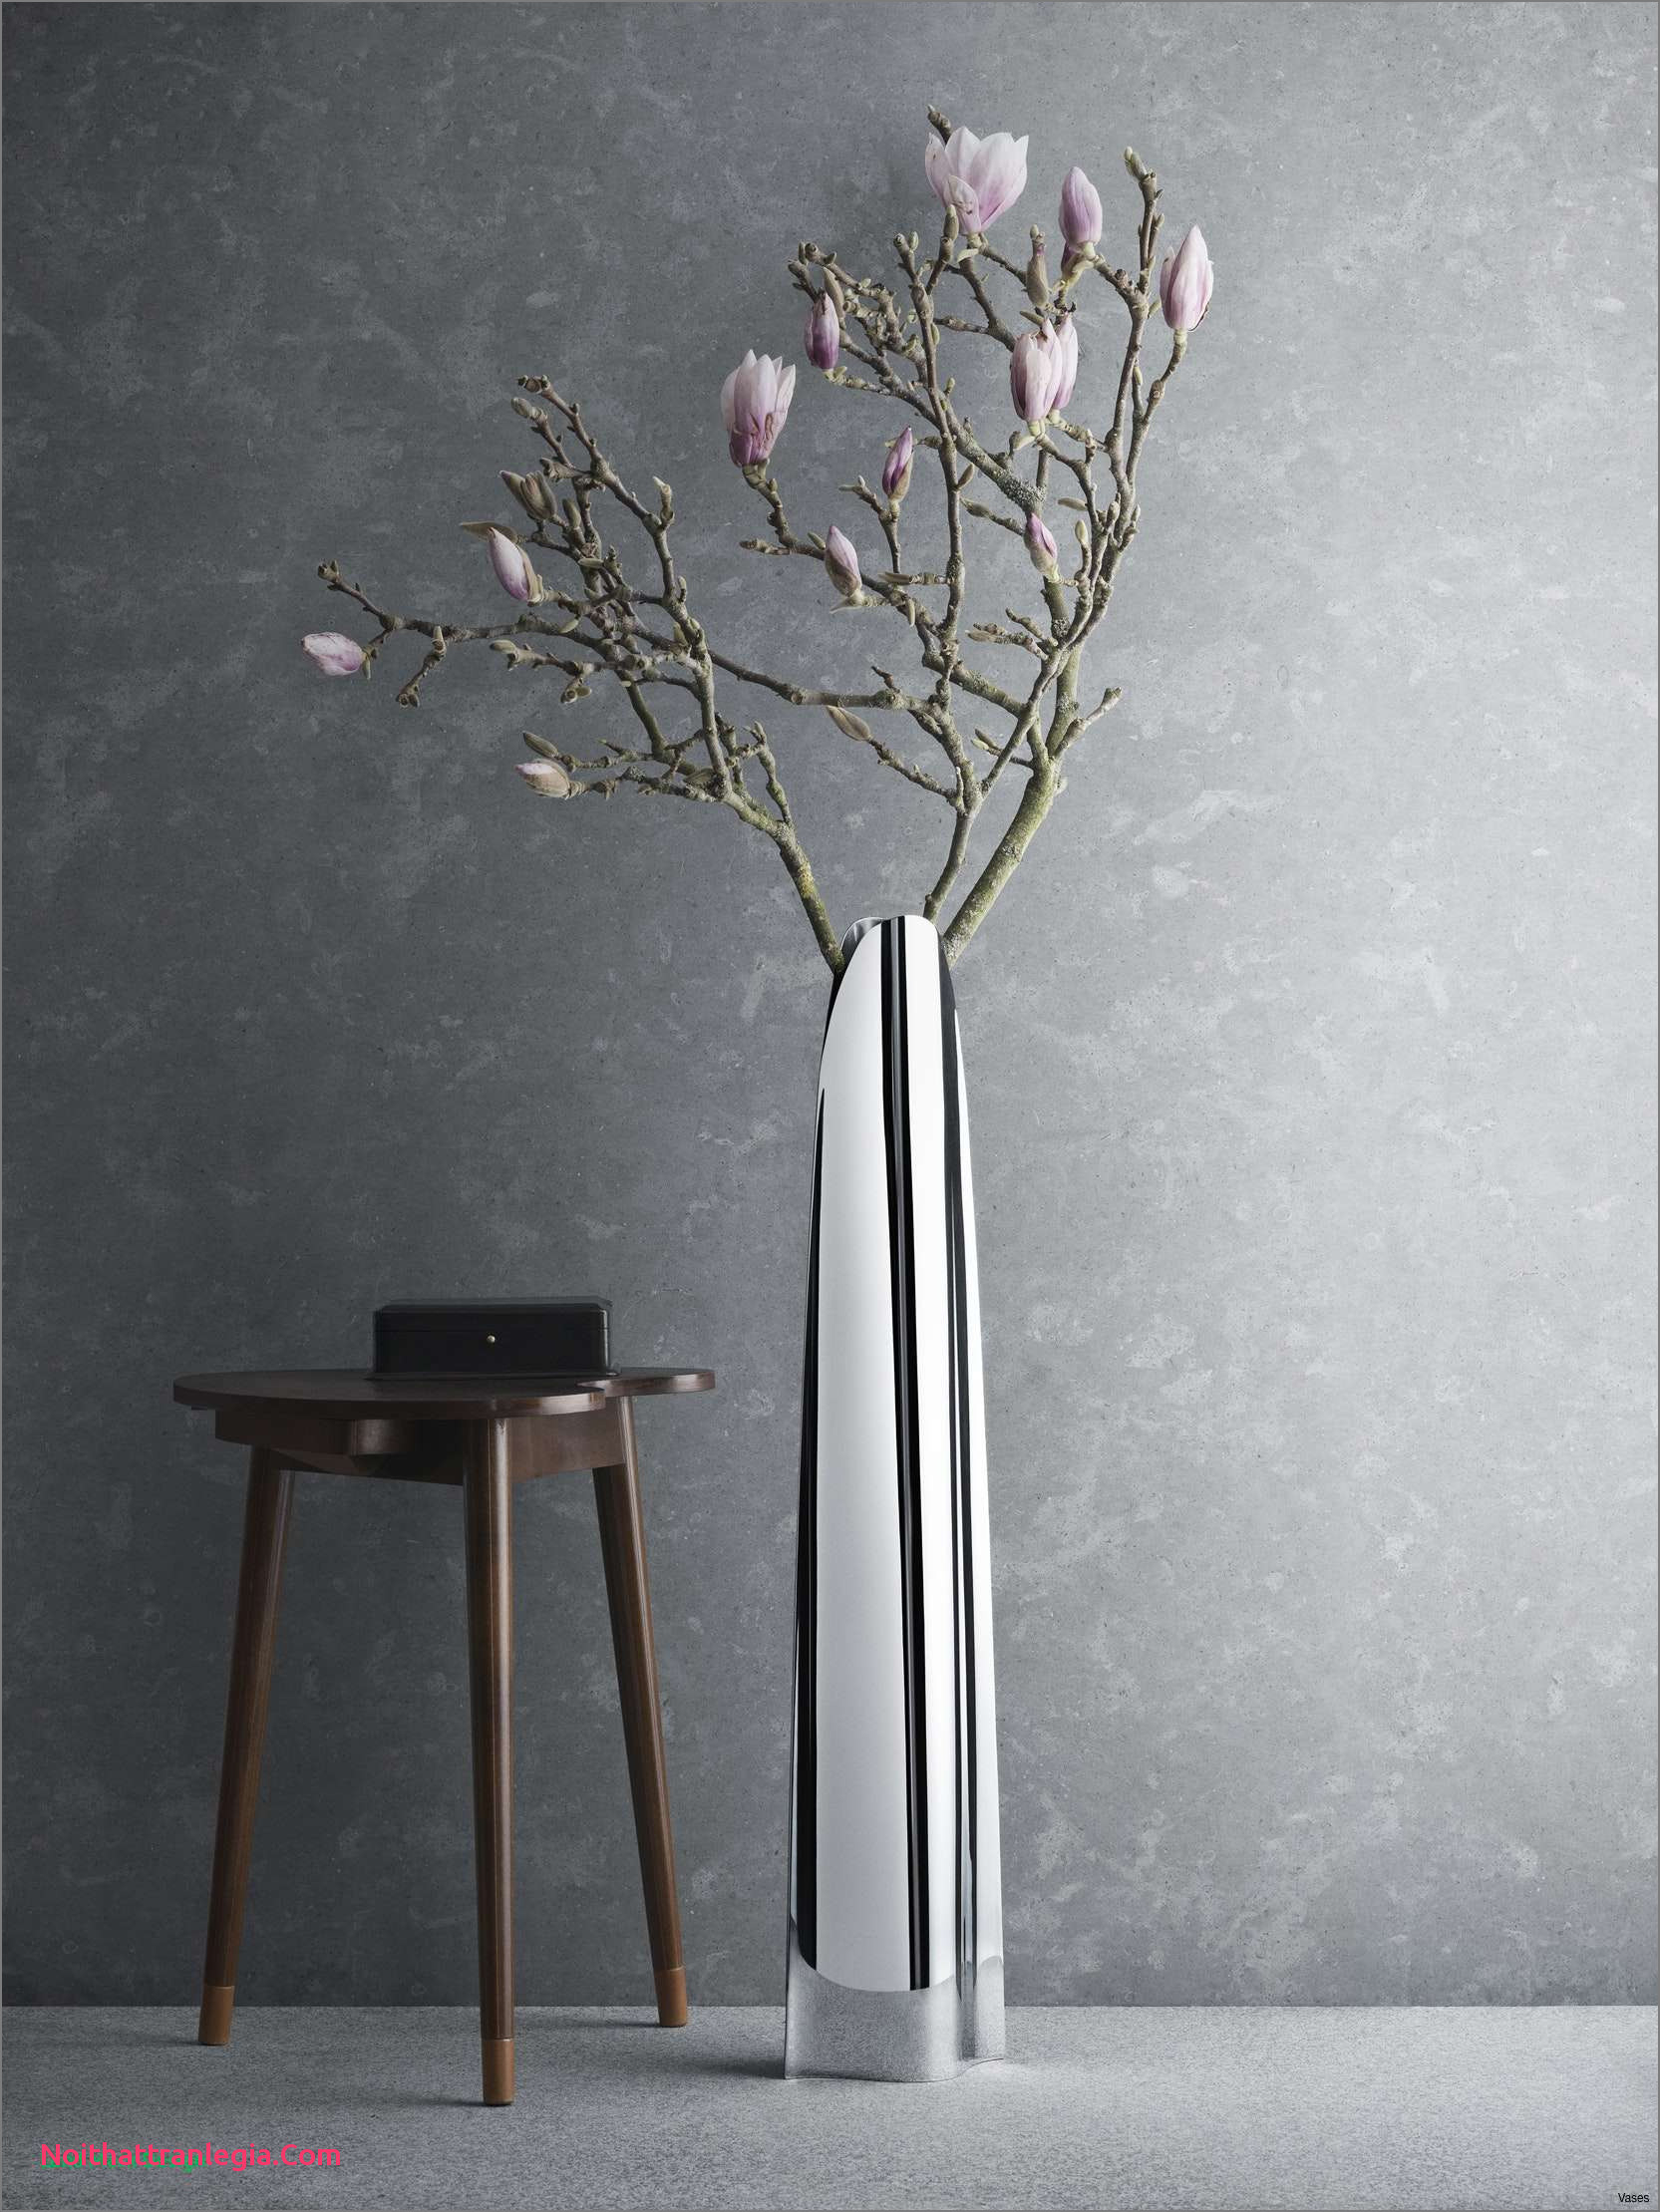 17 Cute Very Tall Glass Floor Vases Decorative Vase Ideas pertaining to dimensions 1665 X 2219